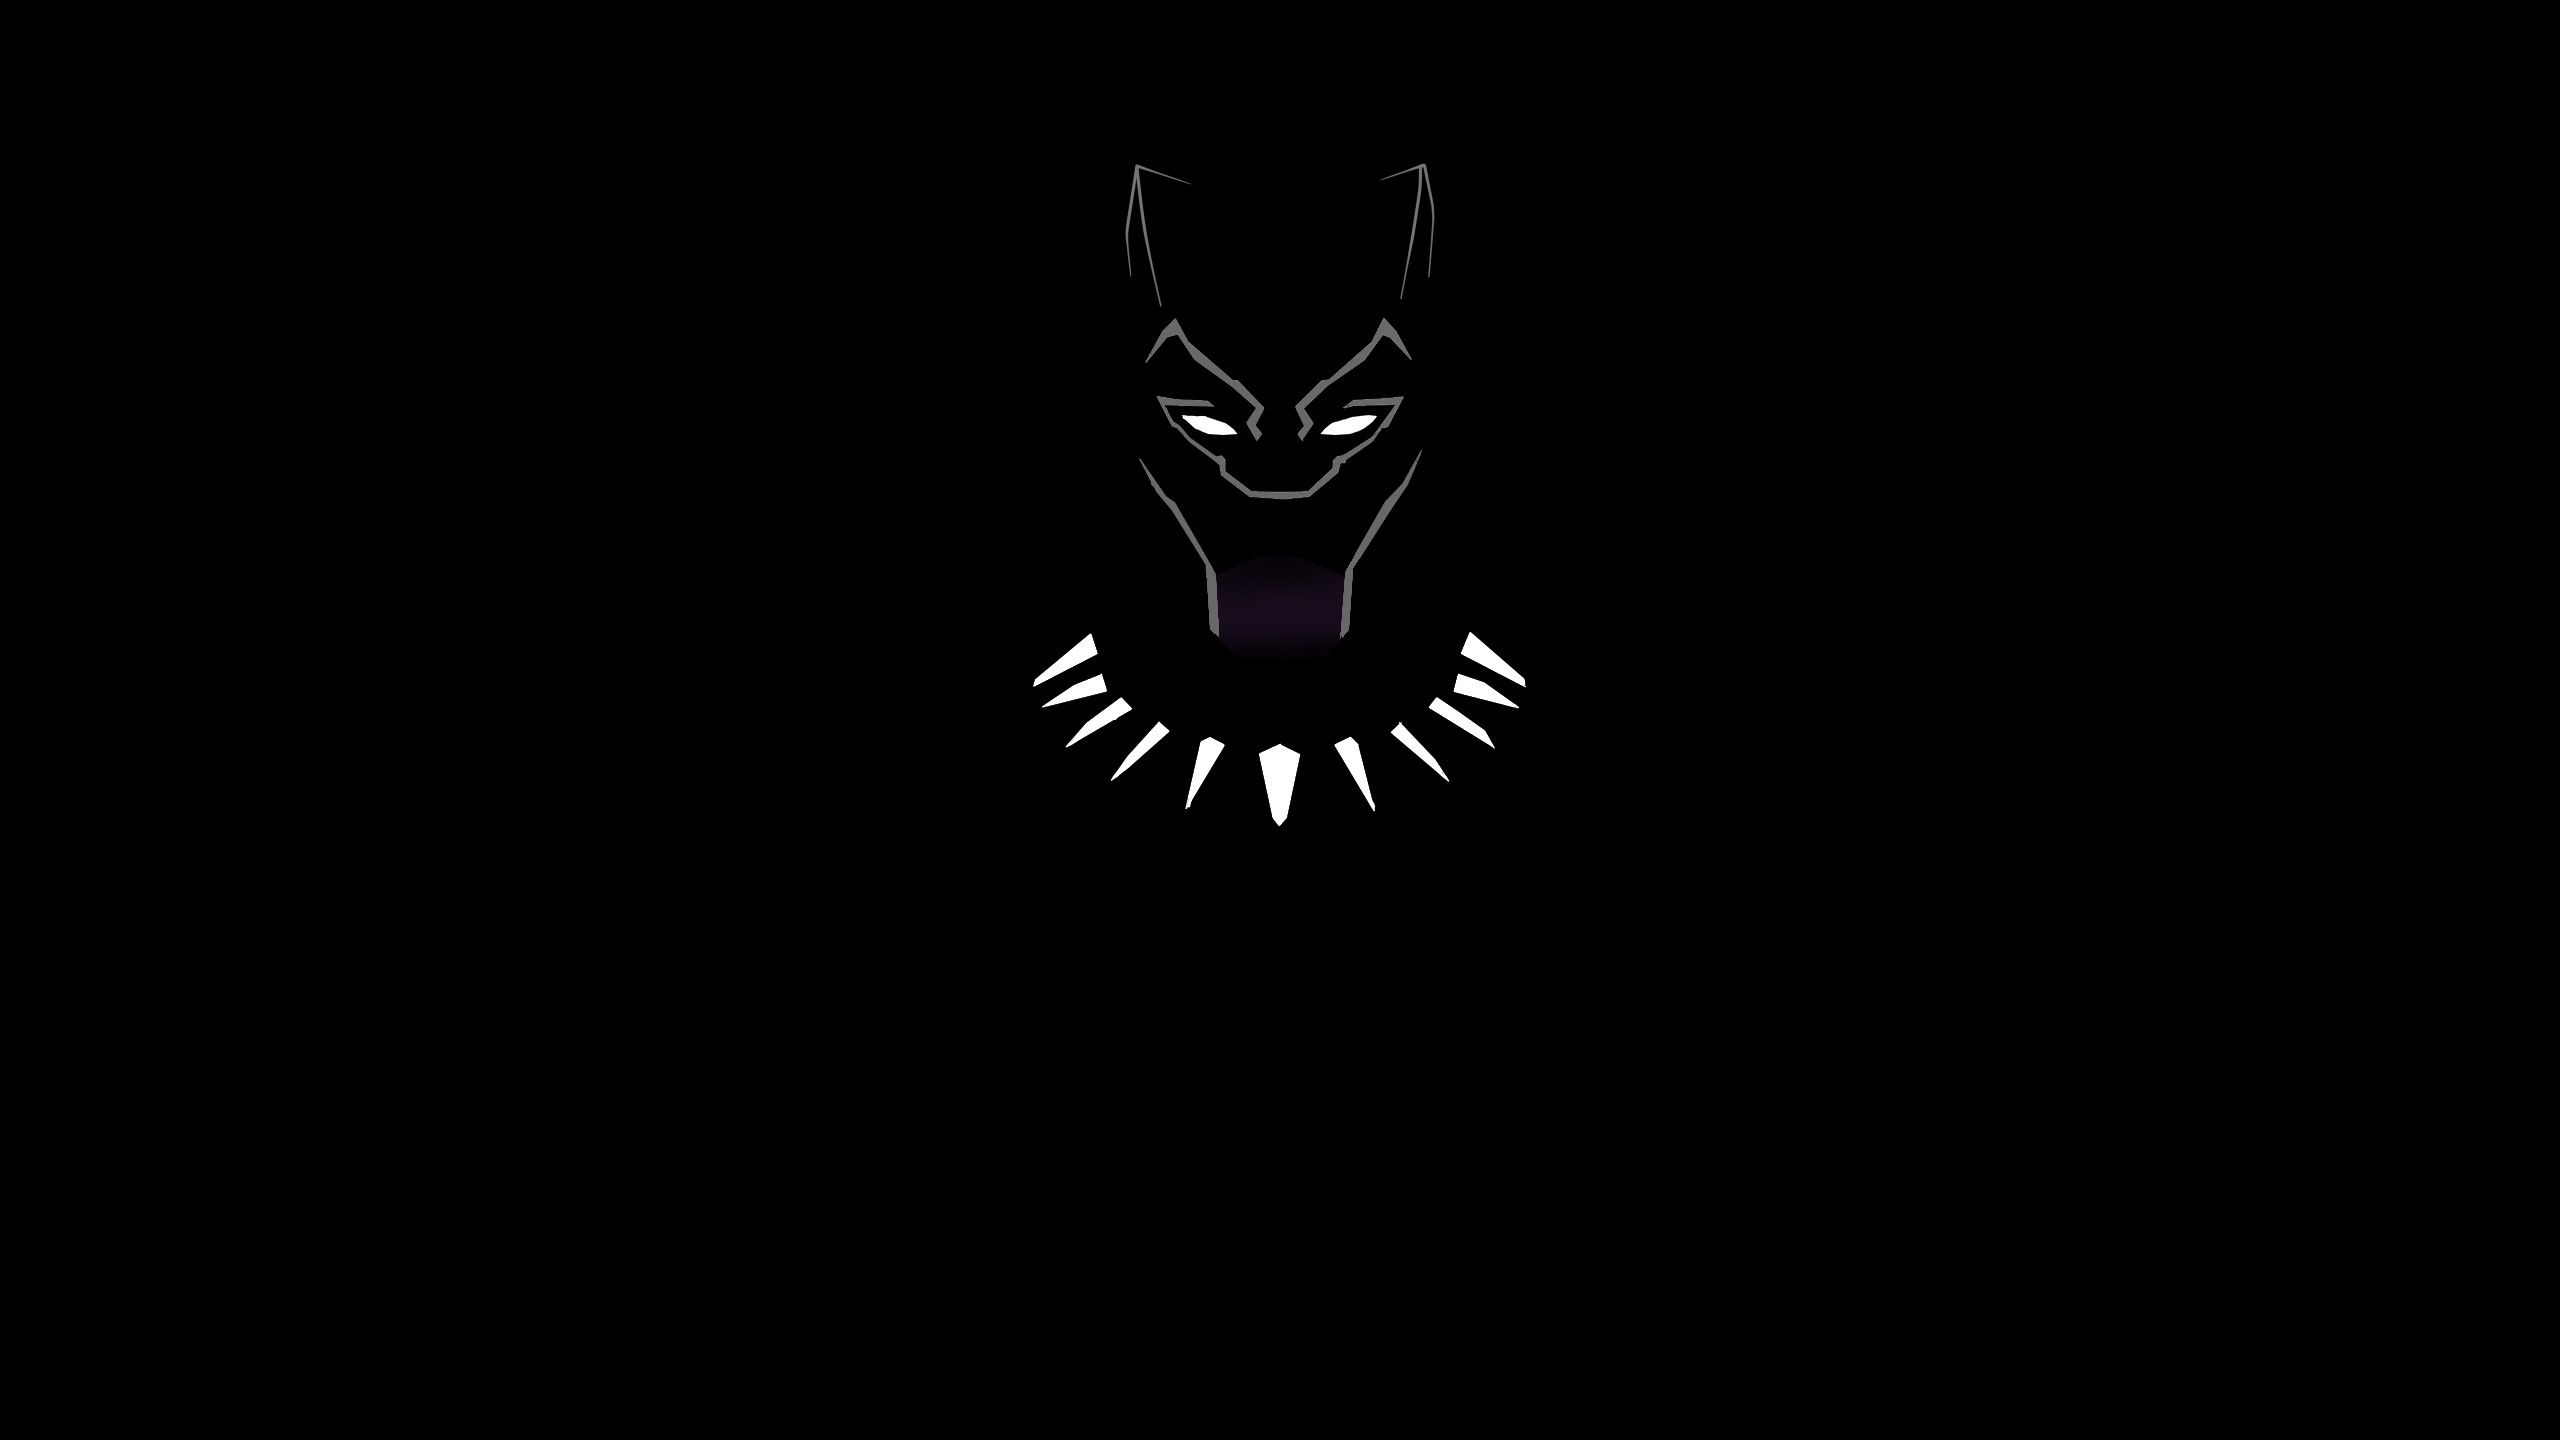 Black Panther PC Wallpapers - Wallpaper Cave